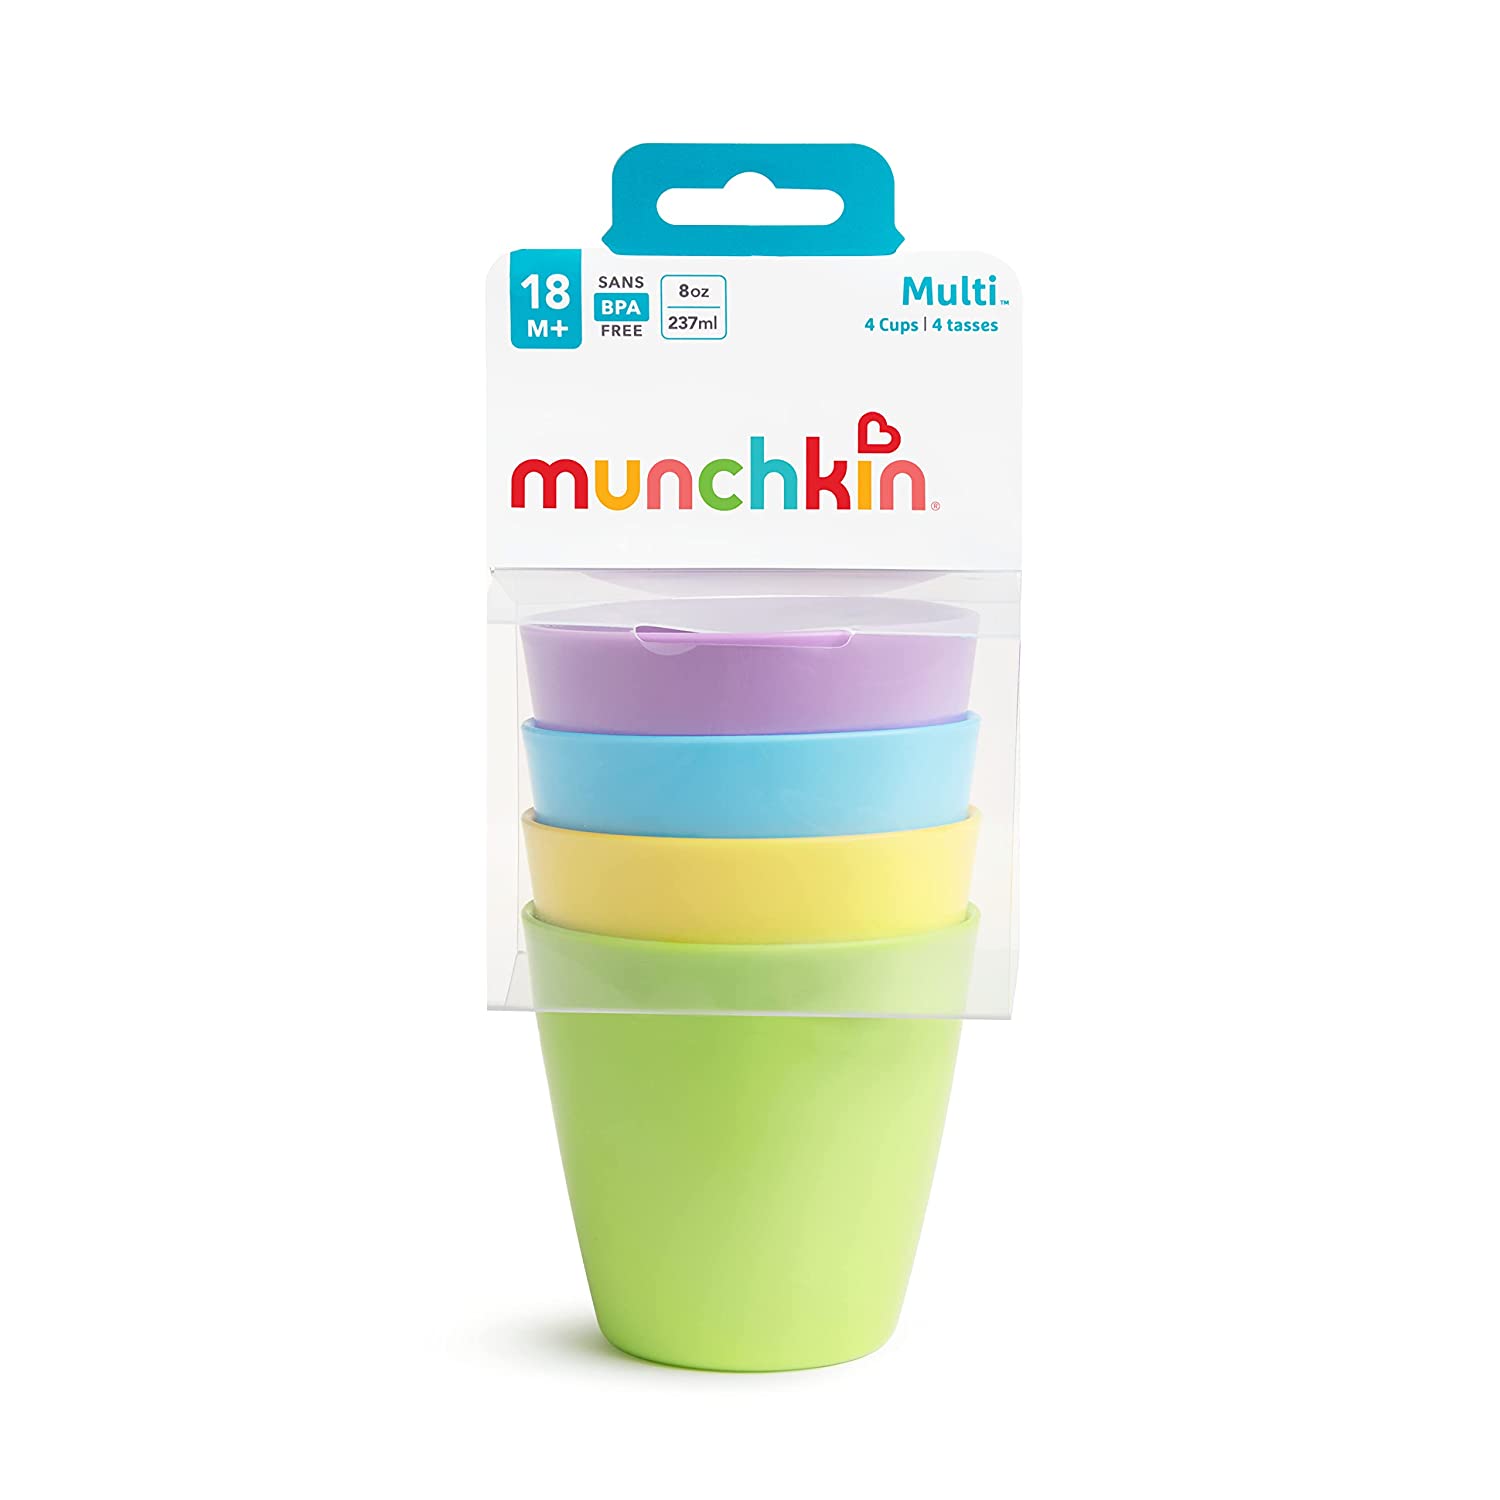 Munchkin Multi Open Training Toddler Cups, 8 Ounce, 4 Pack.